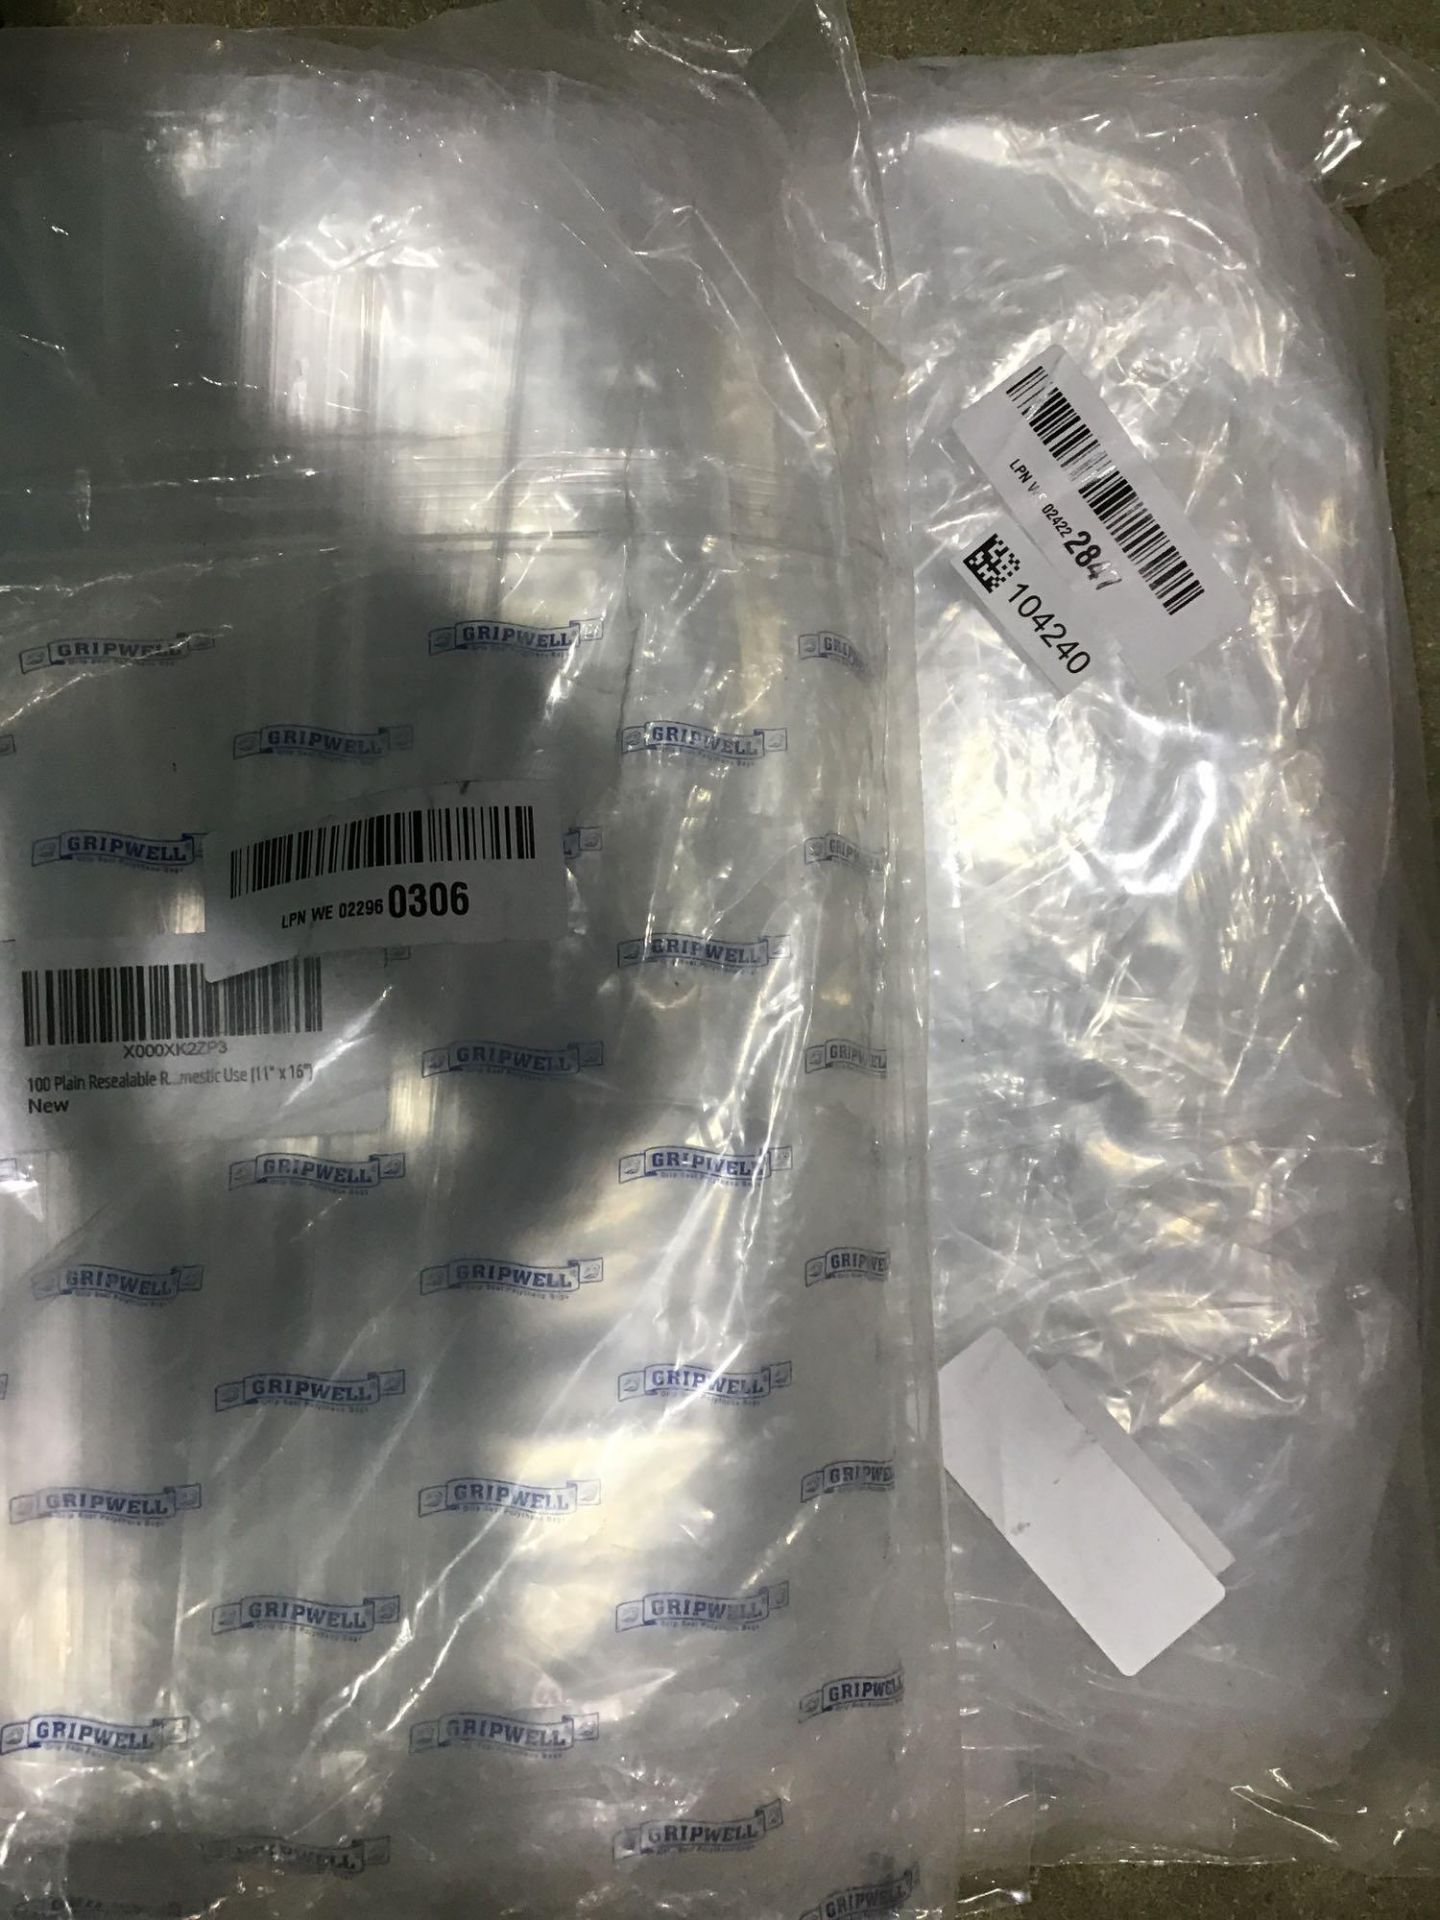 Gripwell Plastic Resealable Grip Seal Bags 11" x 16" - Image 3 of 4